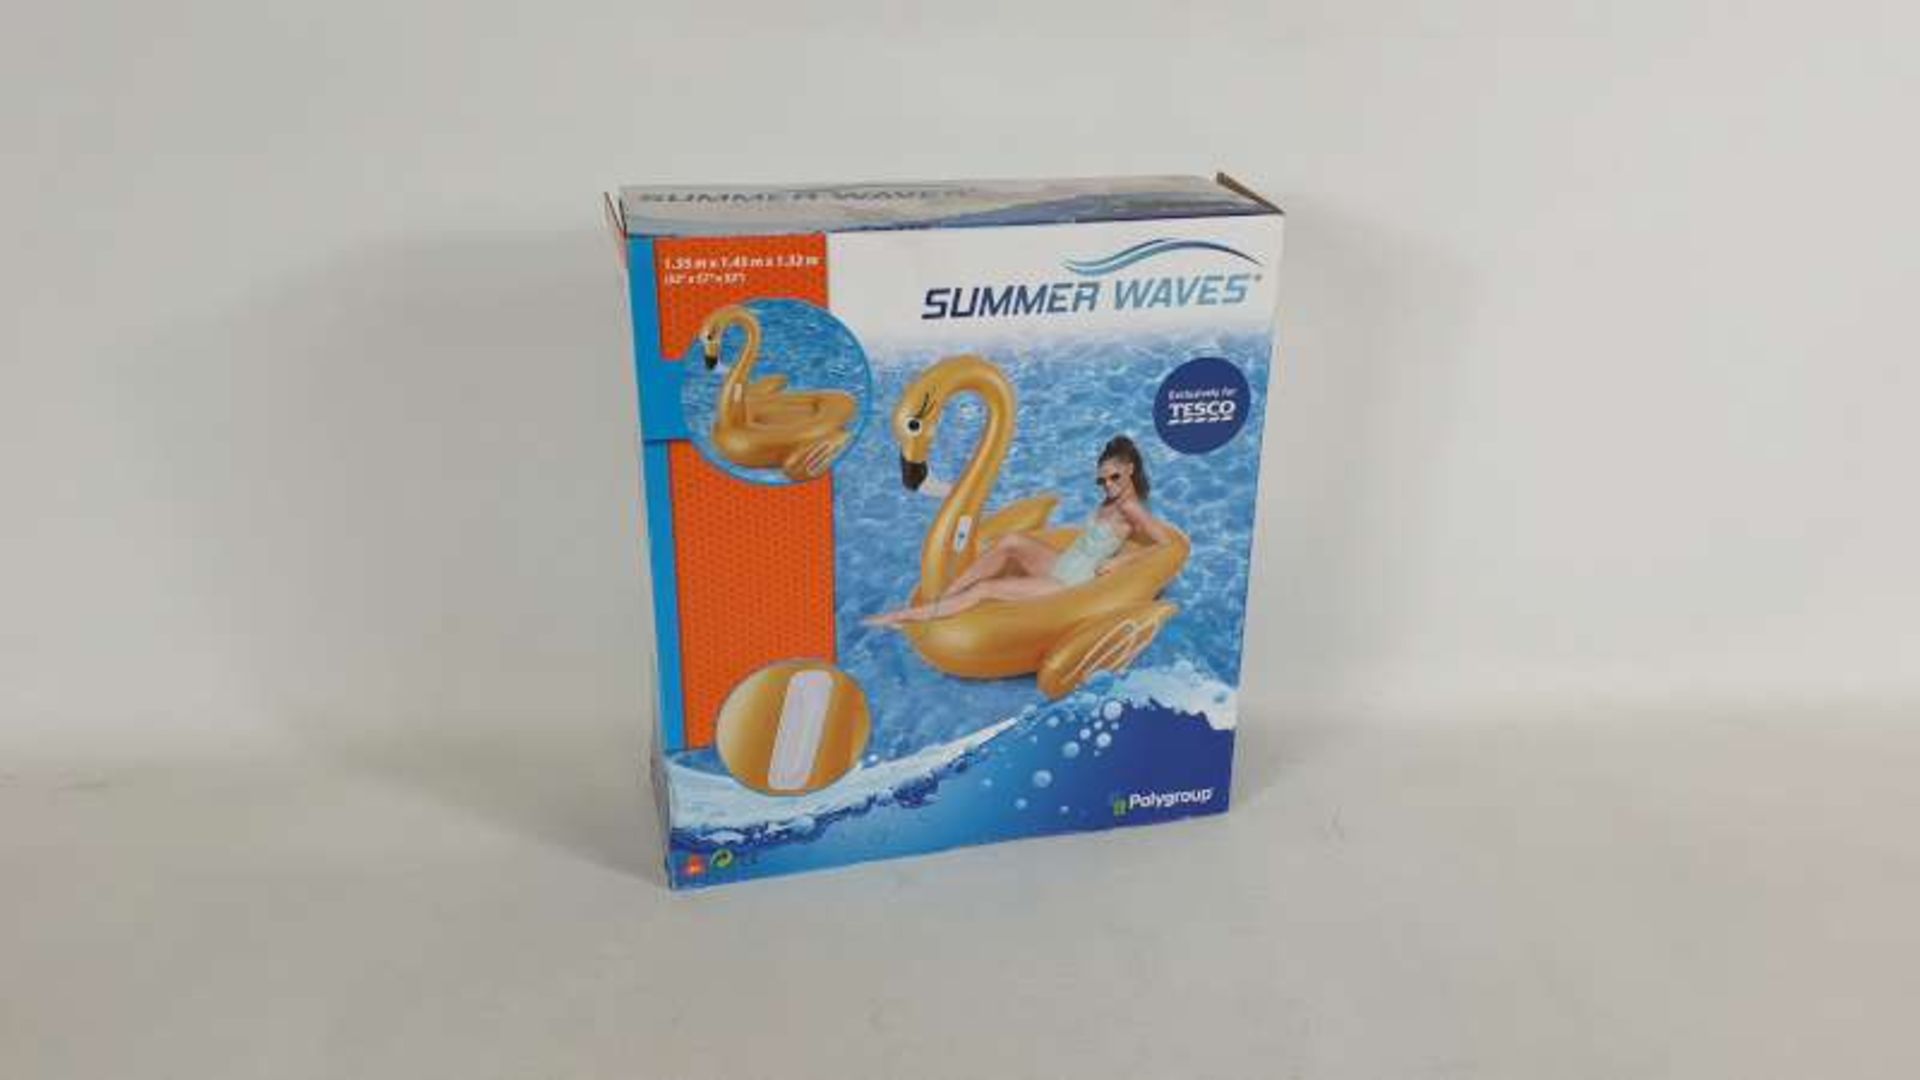 12 X BRAND NEW BOXED SUMMER WAVES GOLD FLAMINGO GIANT ISLAND SIZE 57 INCH